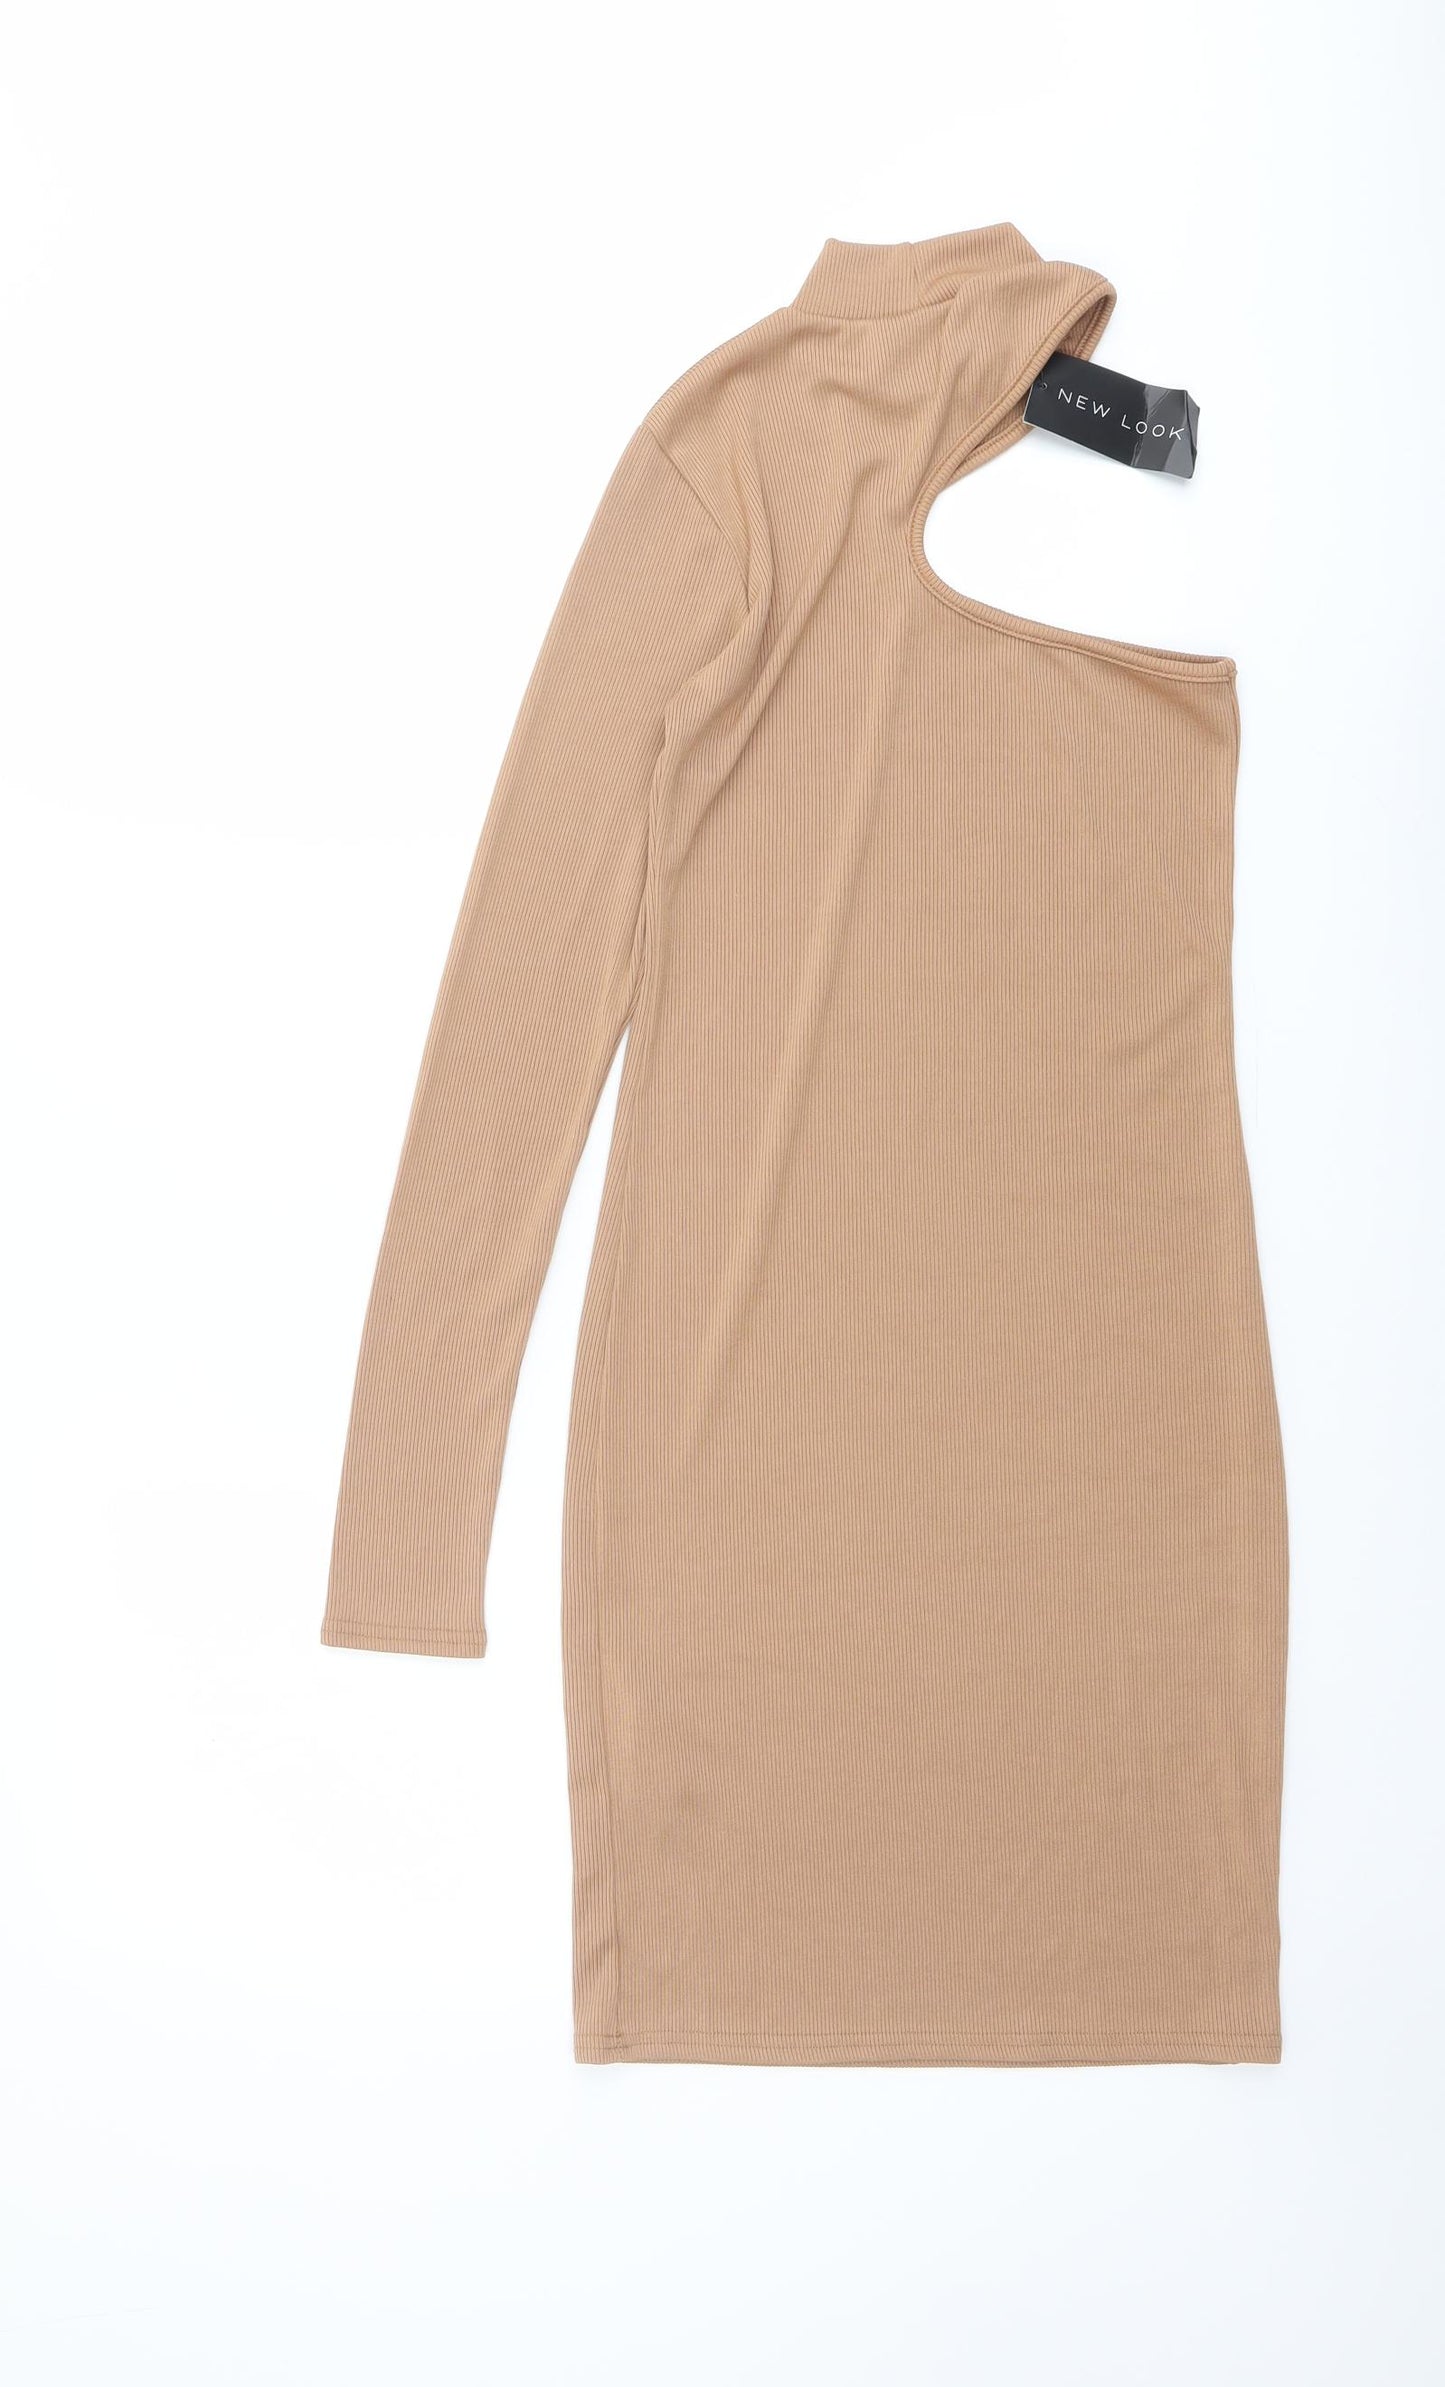 New Look Womens Beige Polyester Bodycon Size 6 One Shoulder Pullover